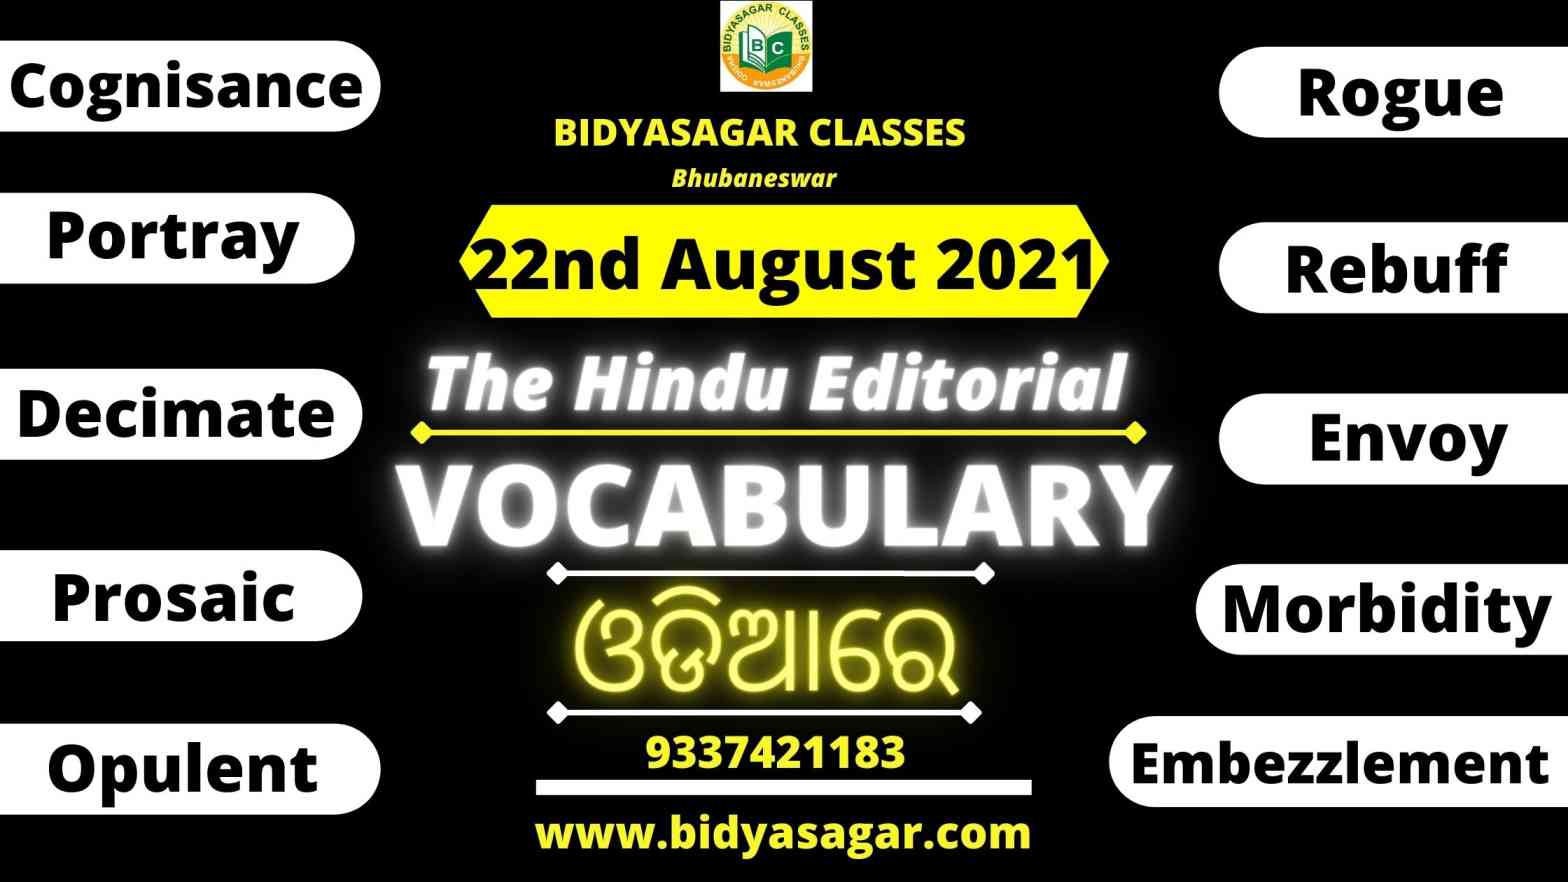 The Hindu Editorial Vocabulary of 22nd August 2021